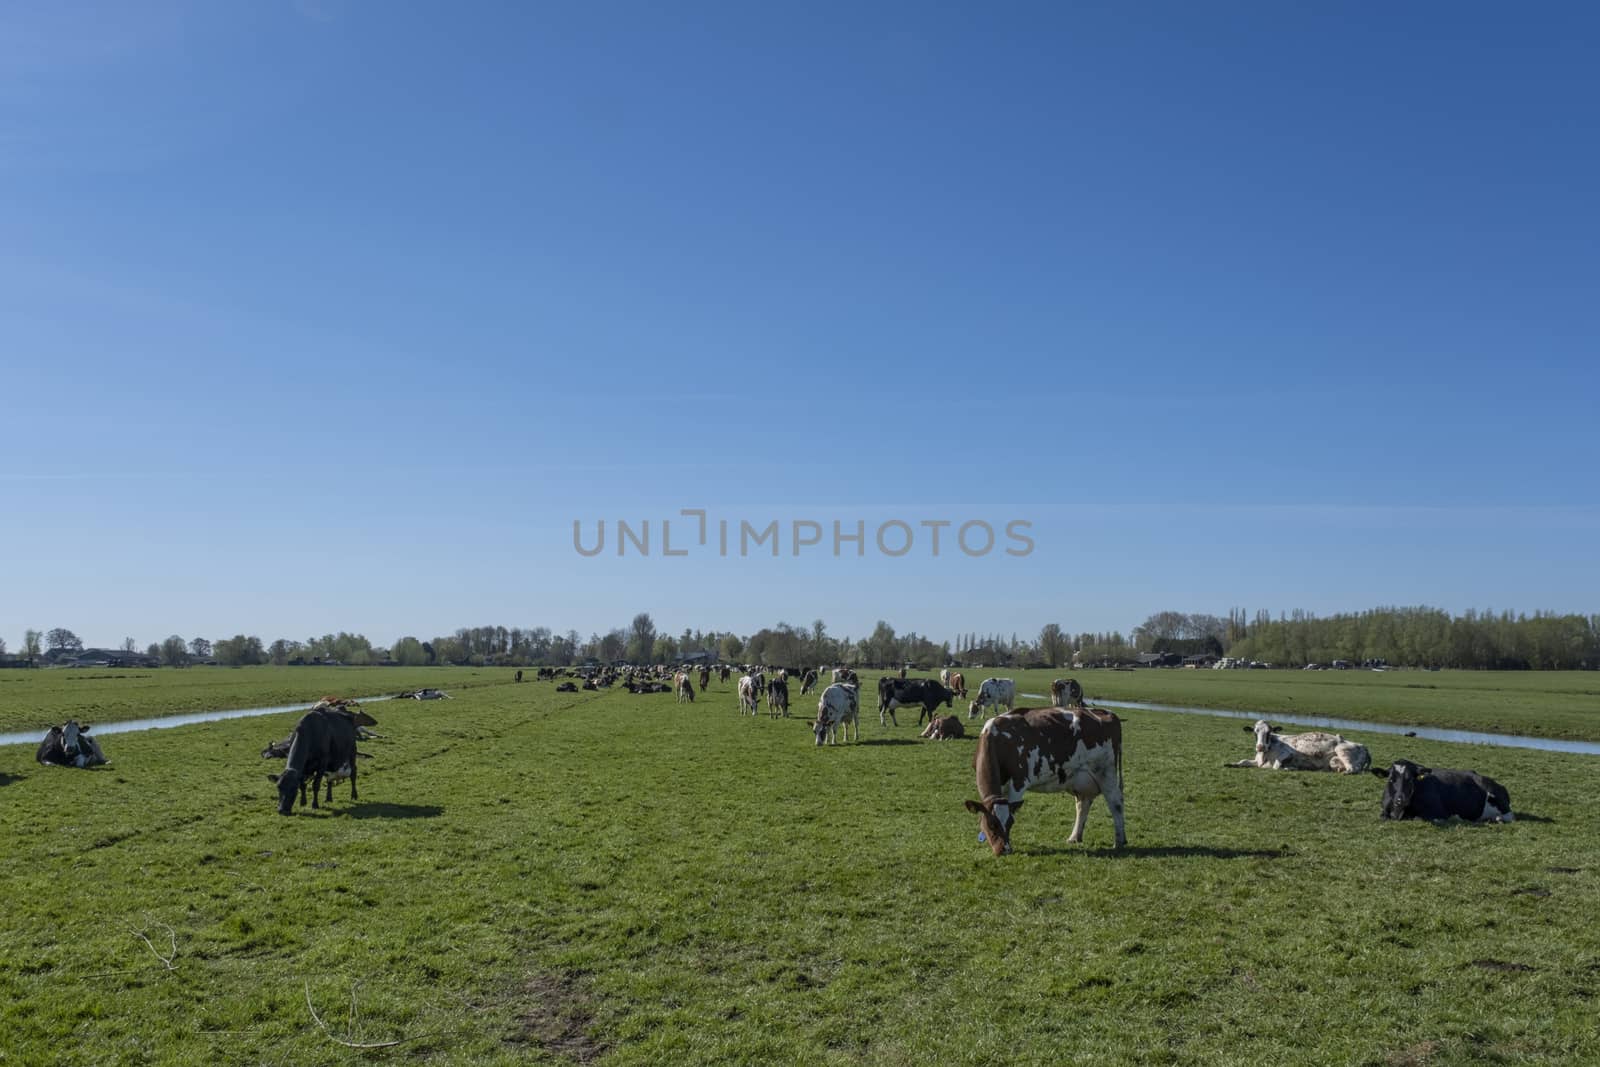 Dutch cows in a typical Dutch setting by Tjeerdkruse